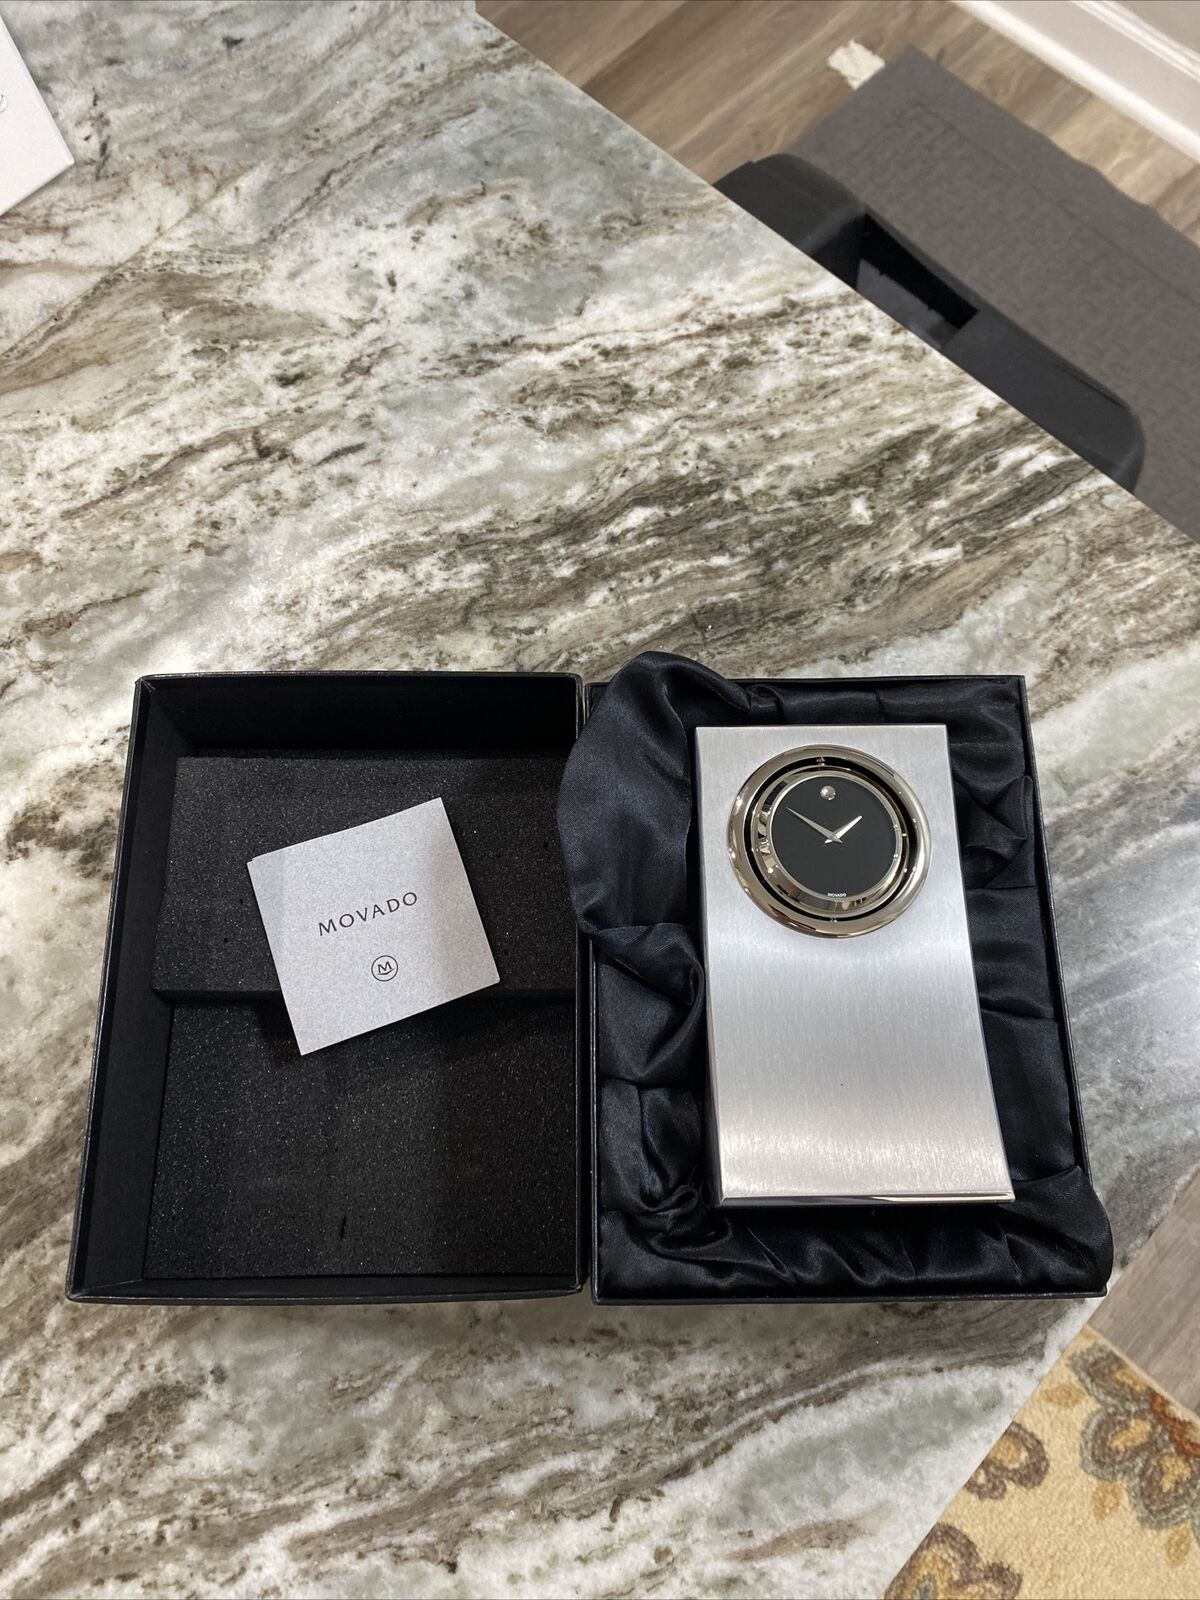 Movado museum spinning quartz desk clock New With Box See Details Below